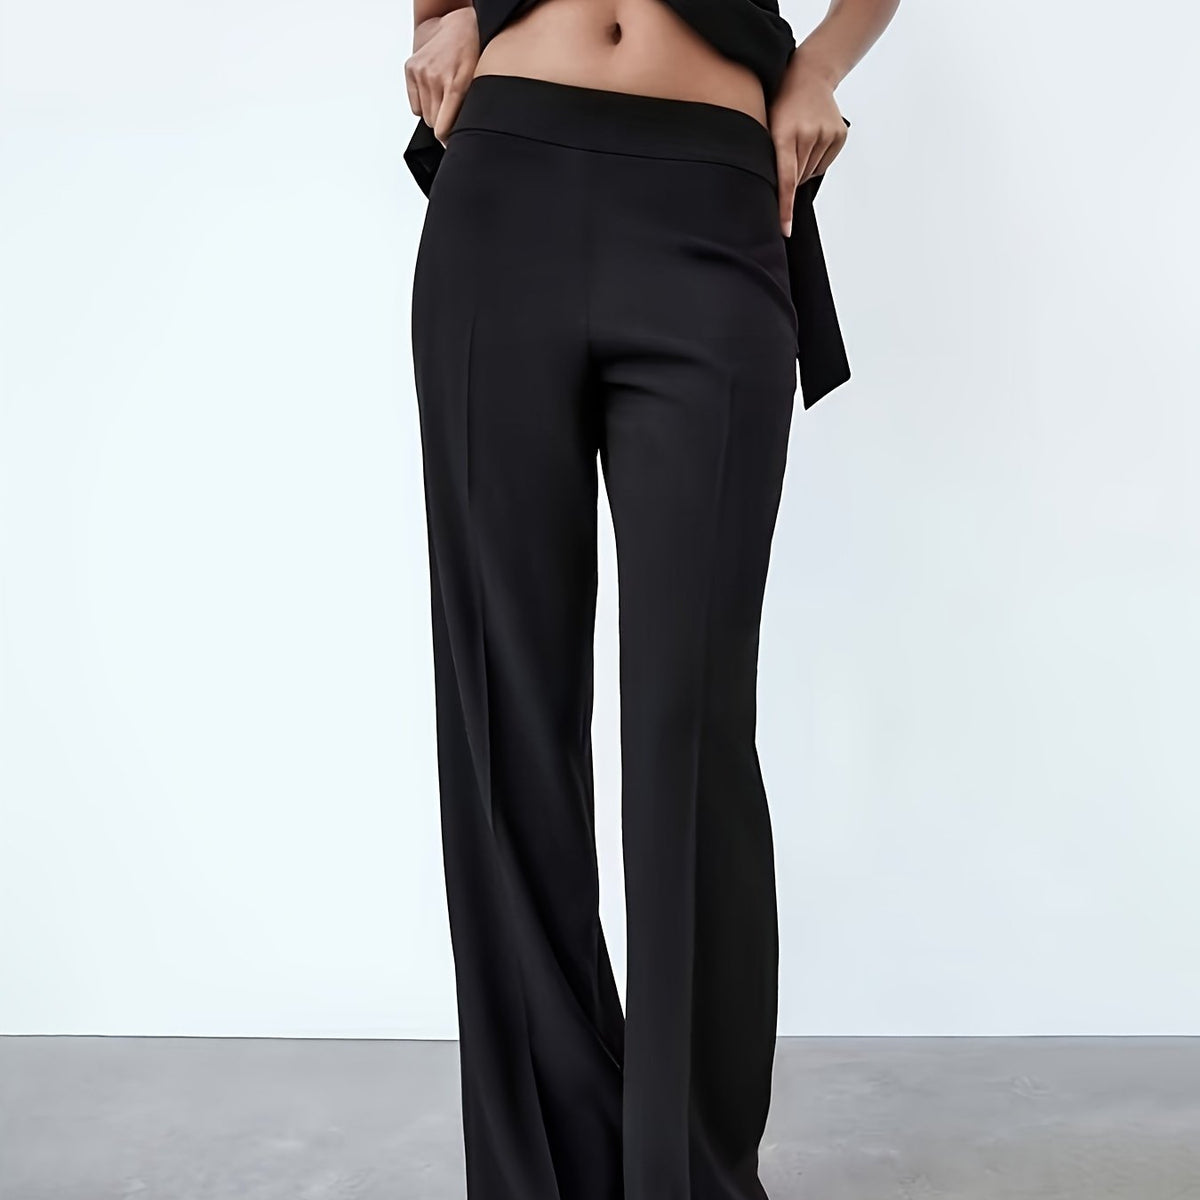 dunnmall  Solid Color Wide Leg Pants, Elegant High Waist Loose Pants For Every Day, Women's Clothing